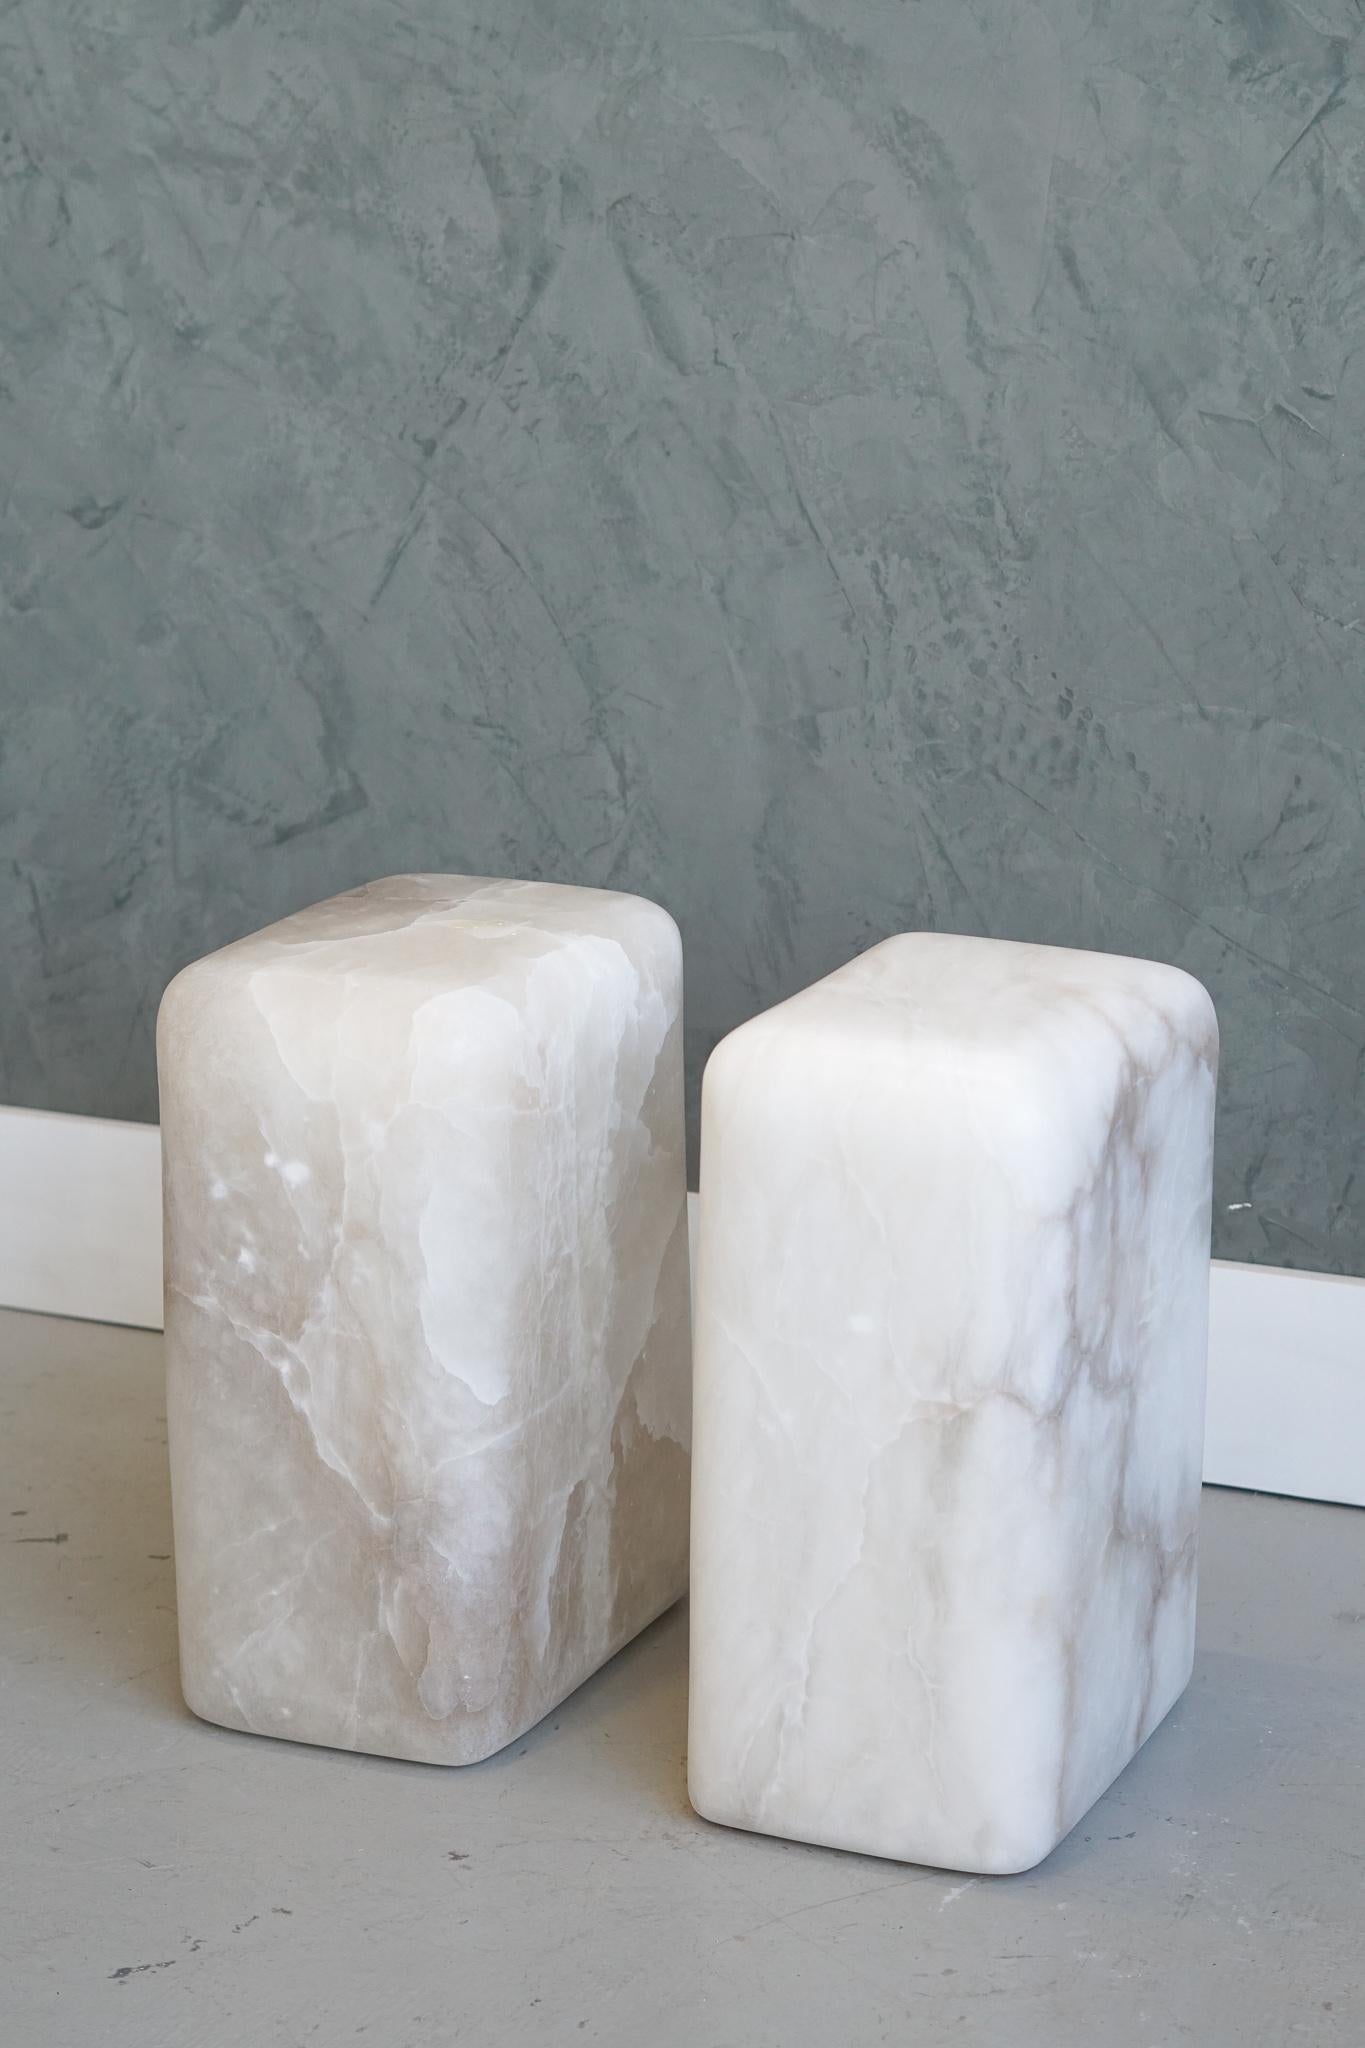 Set of 2 chunk side tables by Swell Studio
Dimensions: D31 x W26 x H46 cm 
Material: White alabaster, Breccia Stazzema


Hand shaped from a solid block of stone. The unique coloration and veining in the blocks are the focal point of this simple